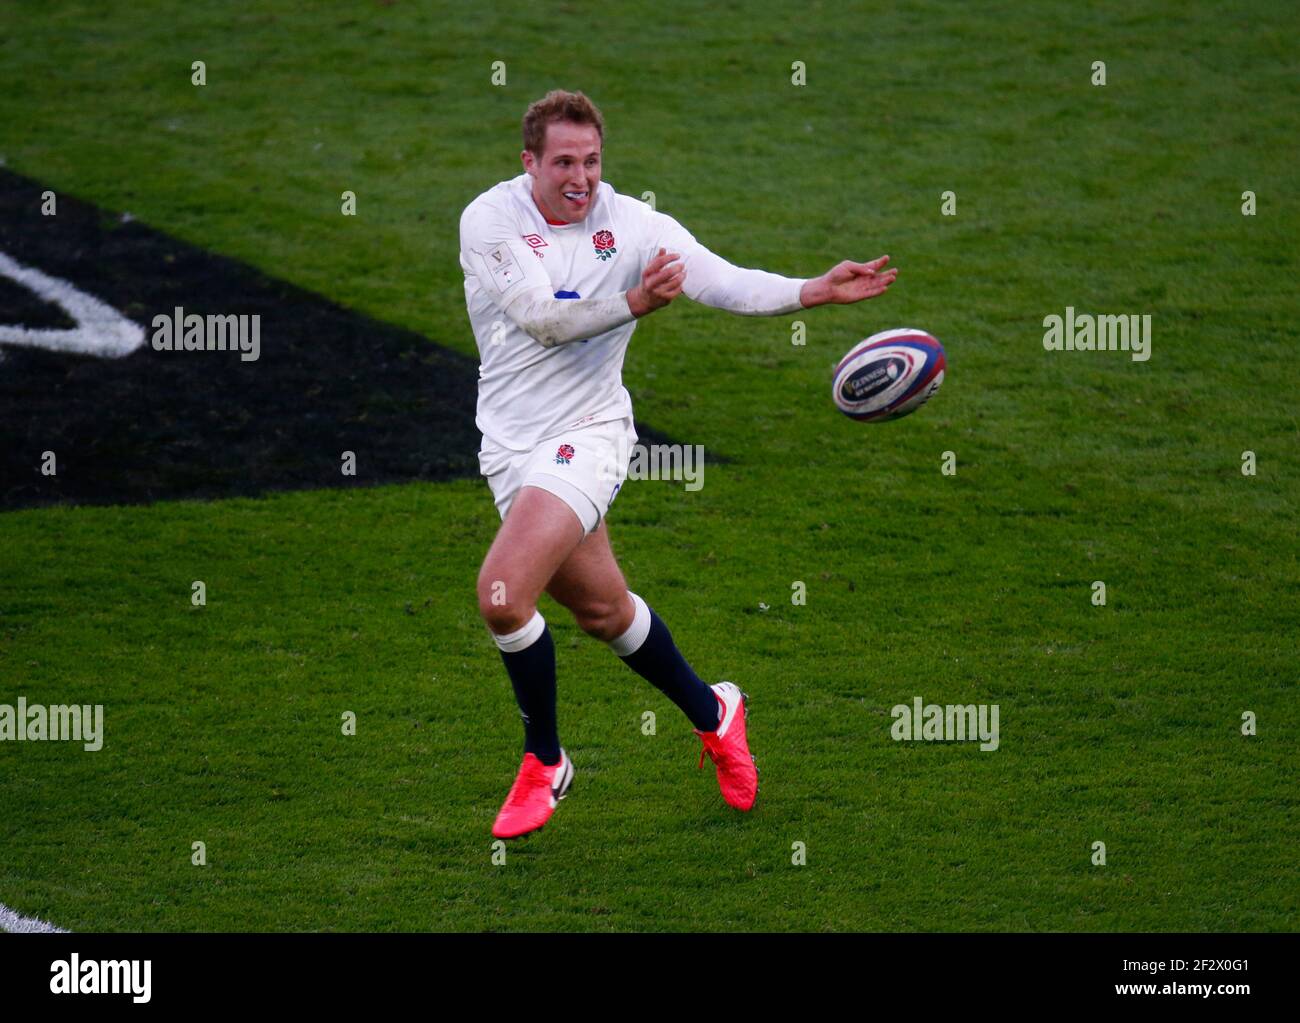 London, UK. 13th Mar, 2021. TWICKENHAM, ENGLAND - MARCH 13: Max Malins of England during Guinness 6 Nations between England and France at Twickenham Stadium, London, UK on 13th March 2021 Credit: Action Foto Sport/Alamy Live News Stock Photo